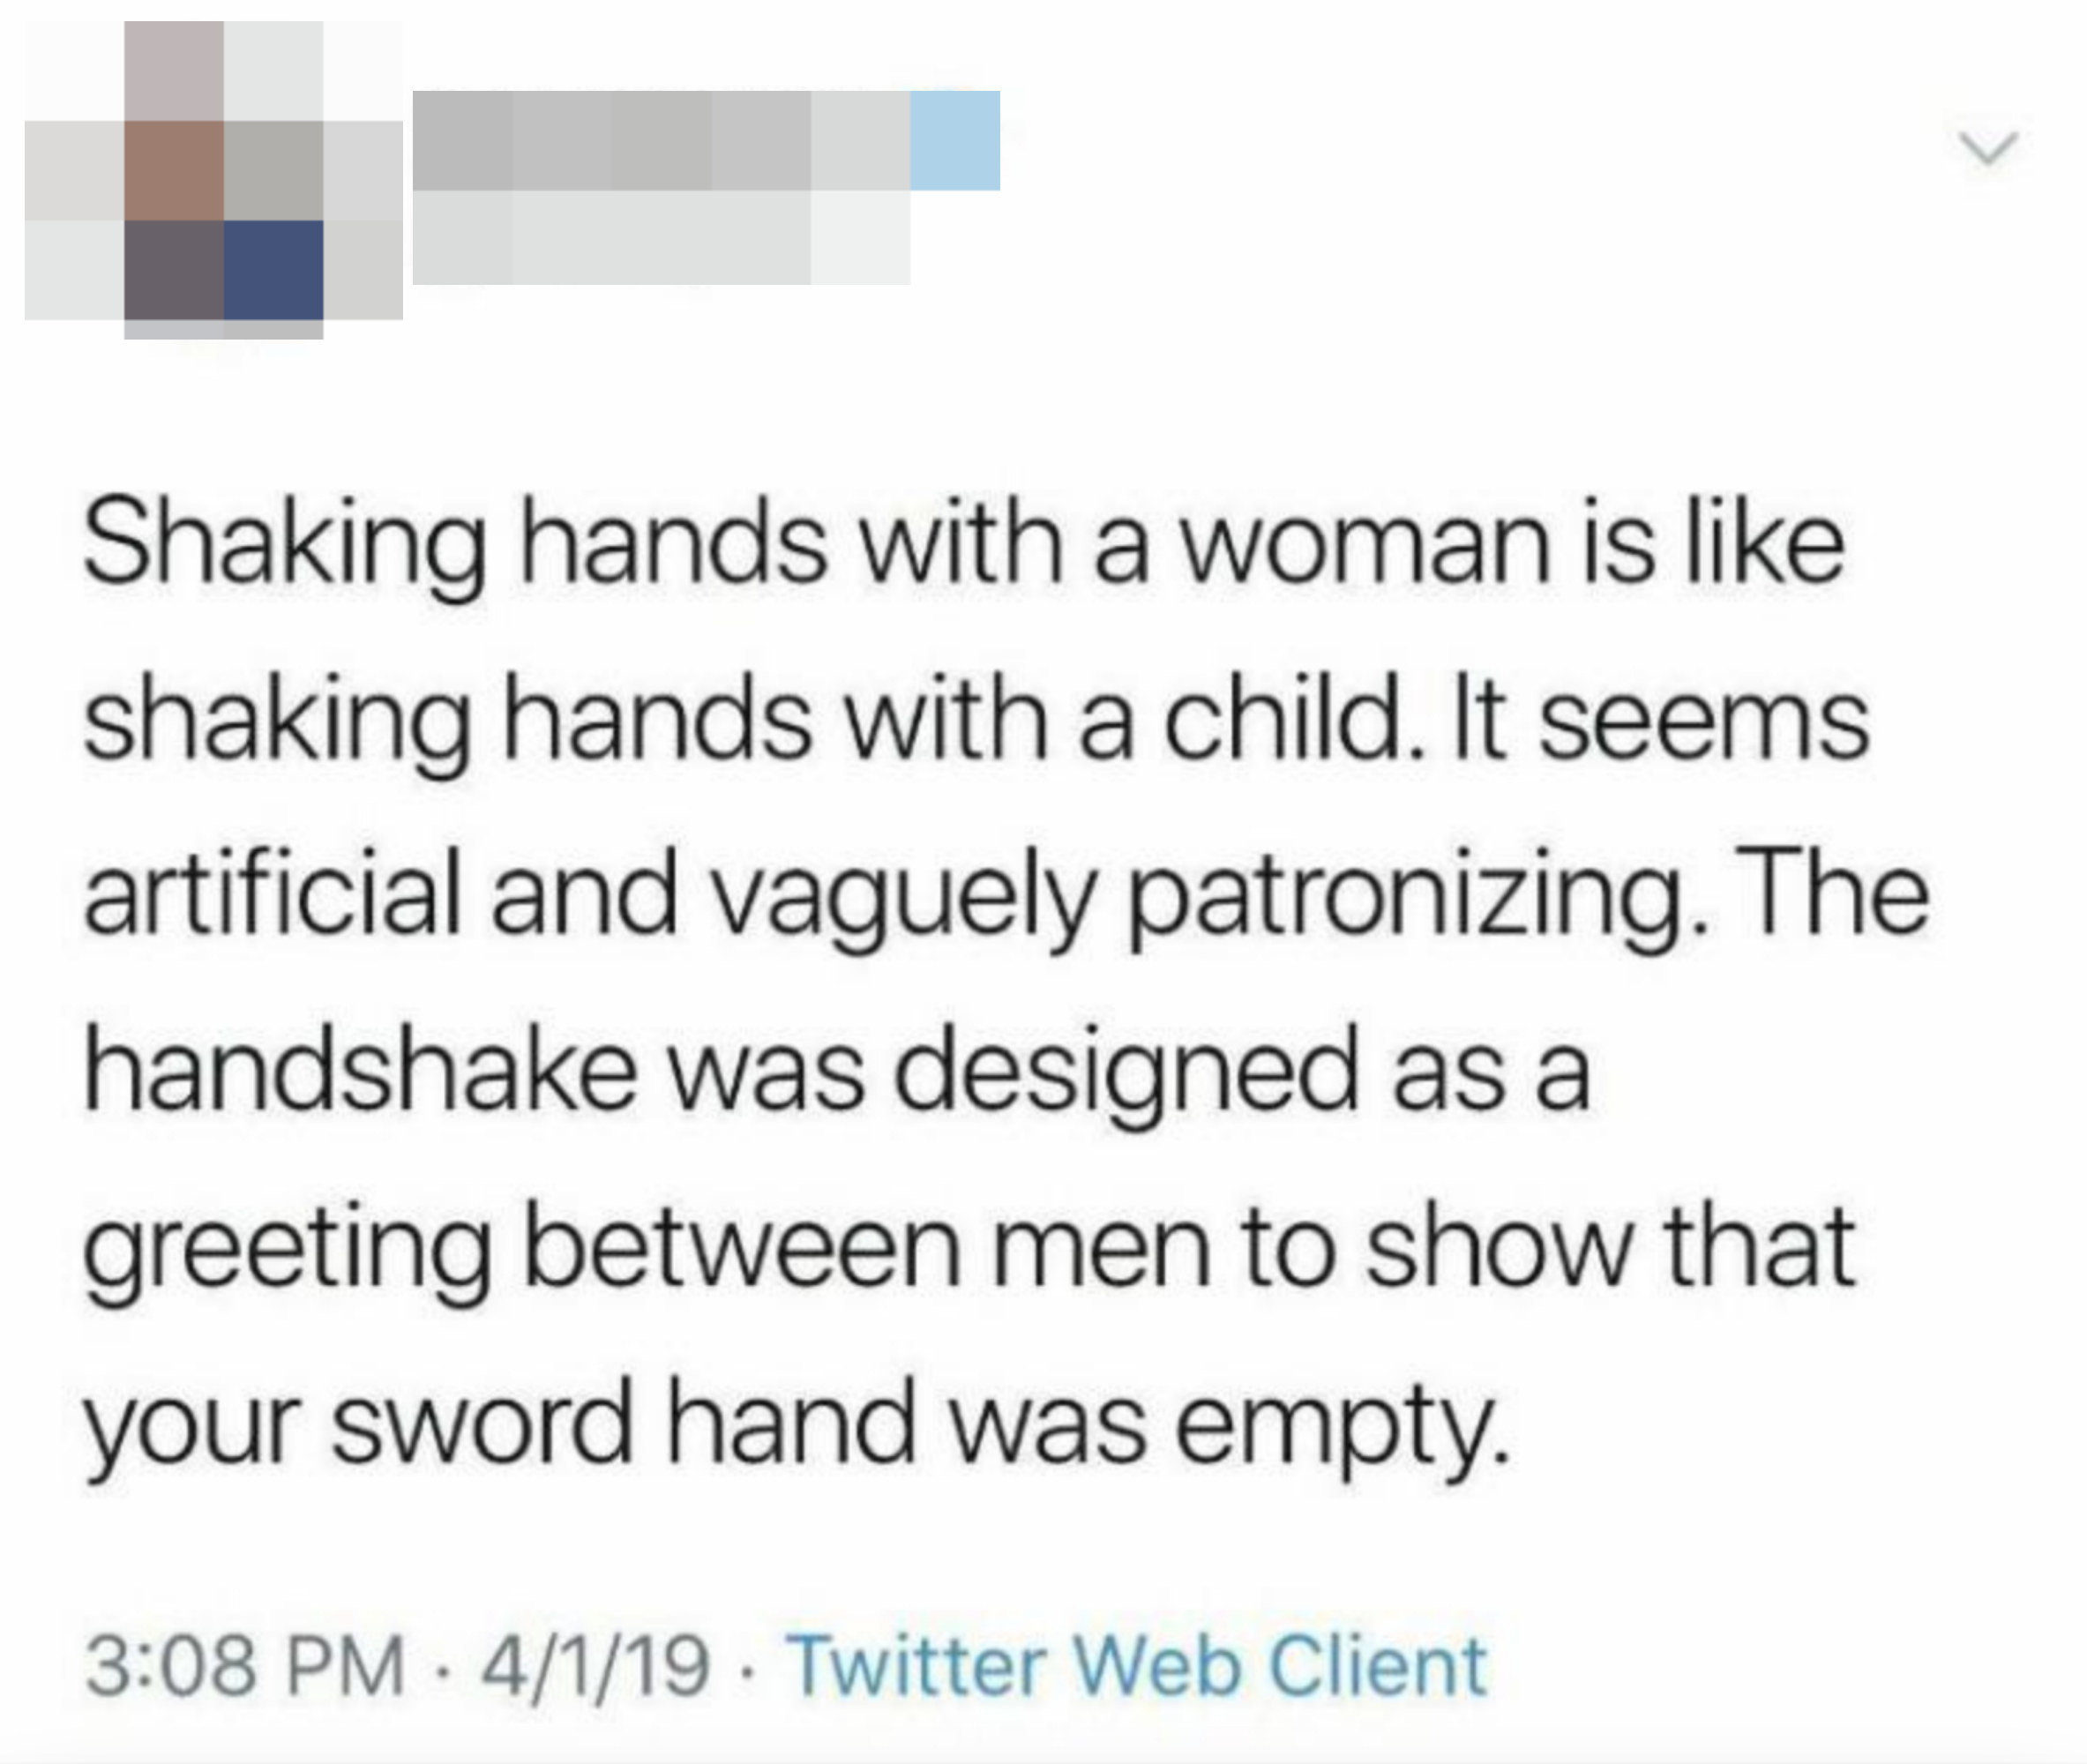 &quot;shaking hands with a woman is like shaking hands with a child...&quot;